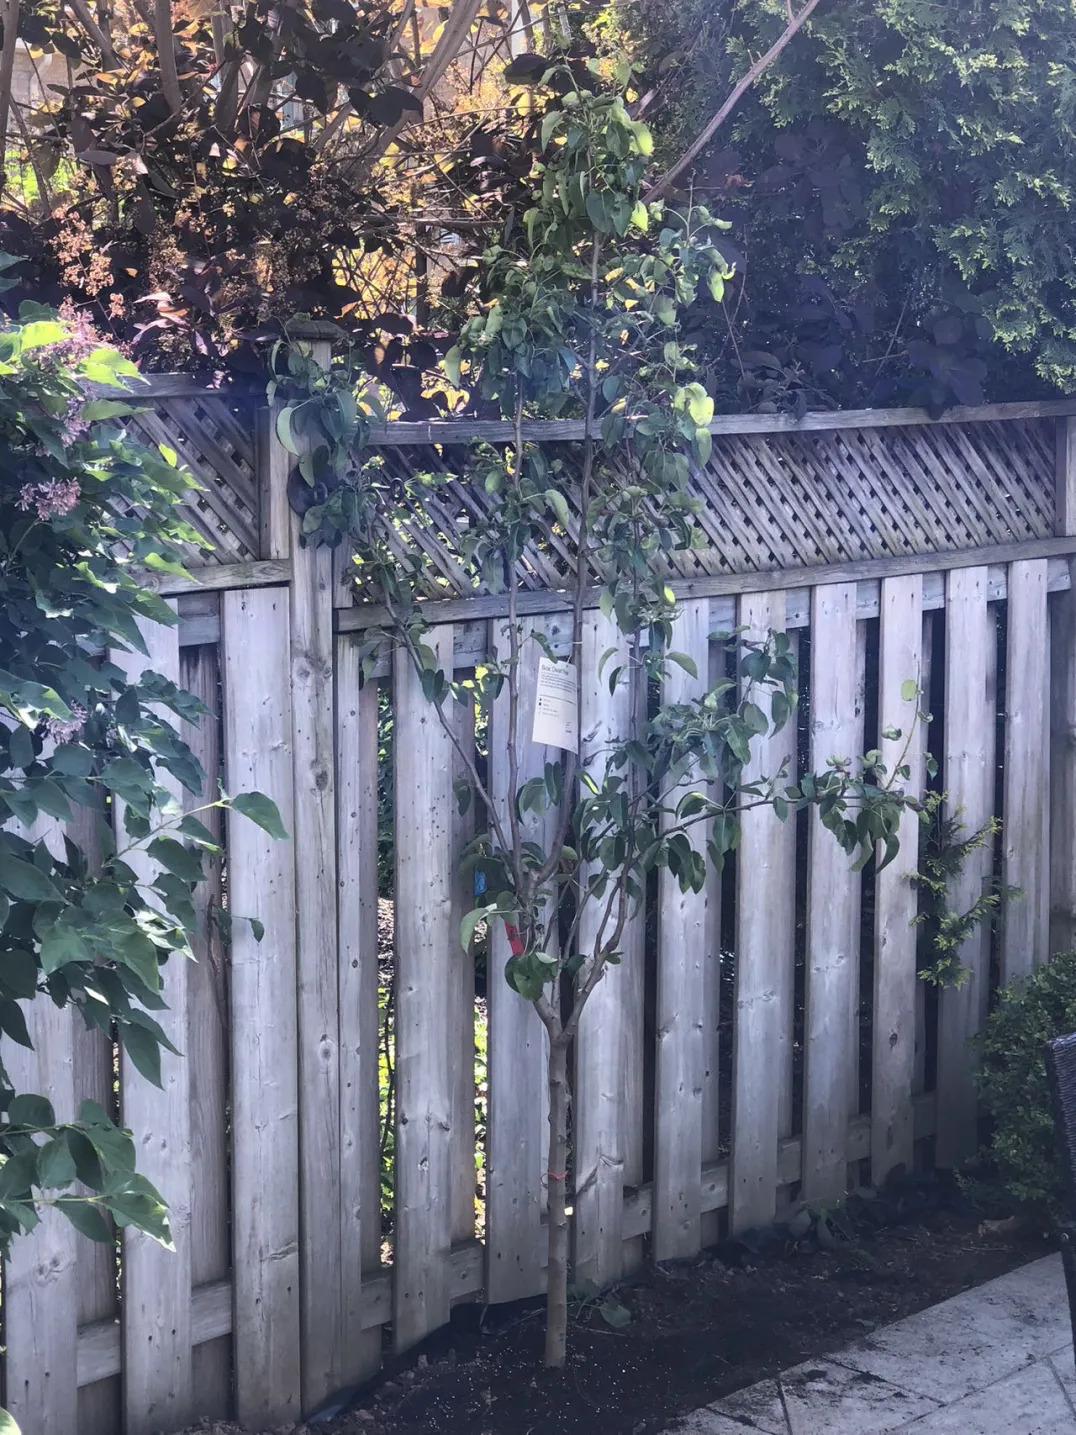 A small tree next to a fence.